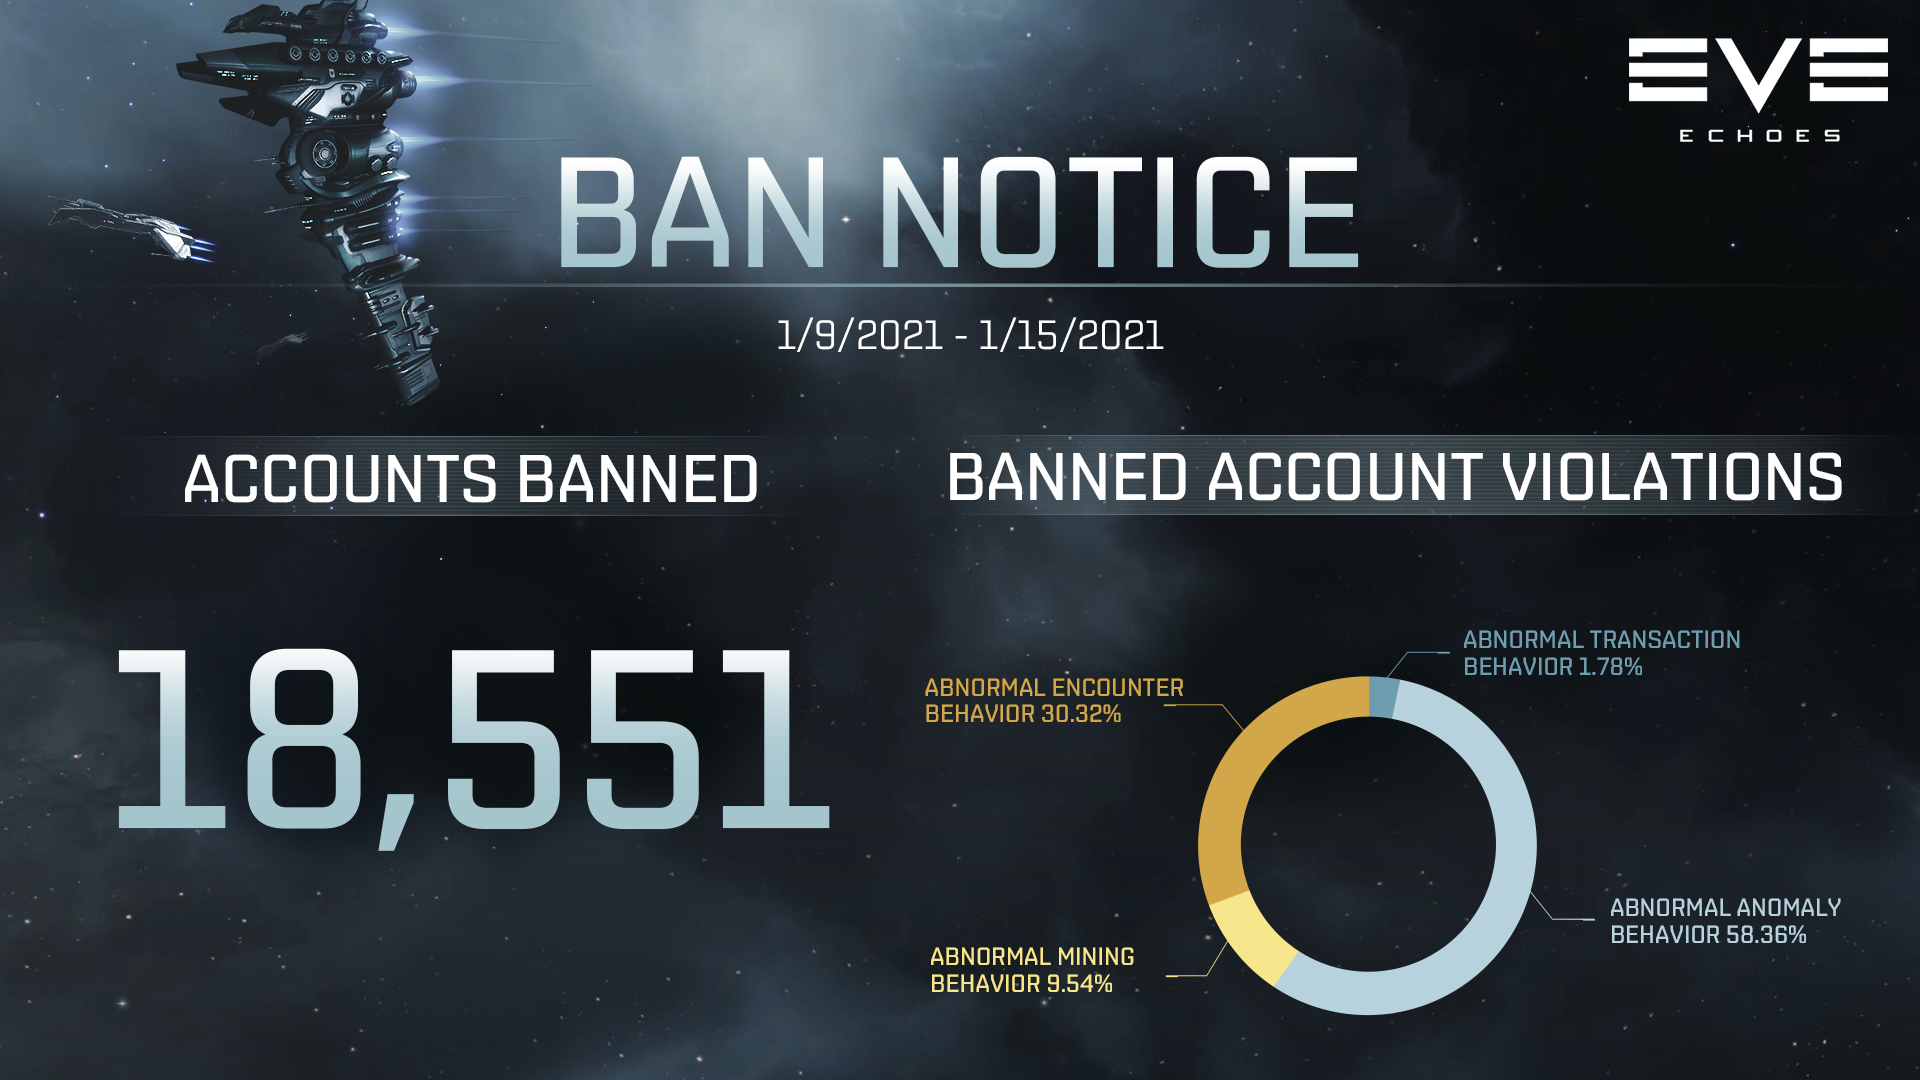 Ban Notice for 01/09-01/15